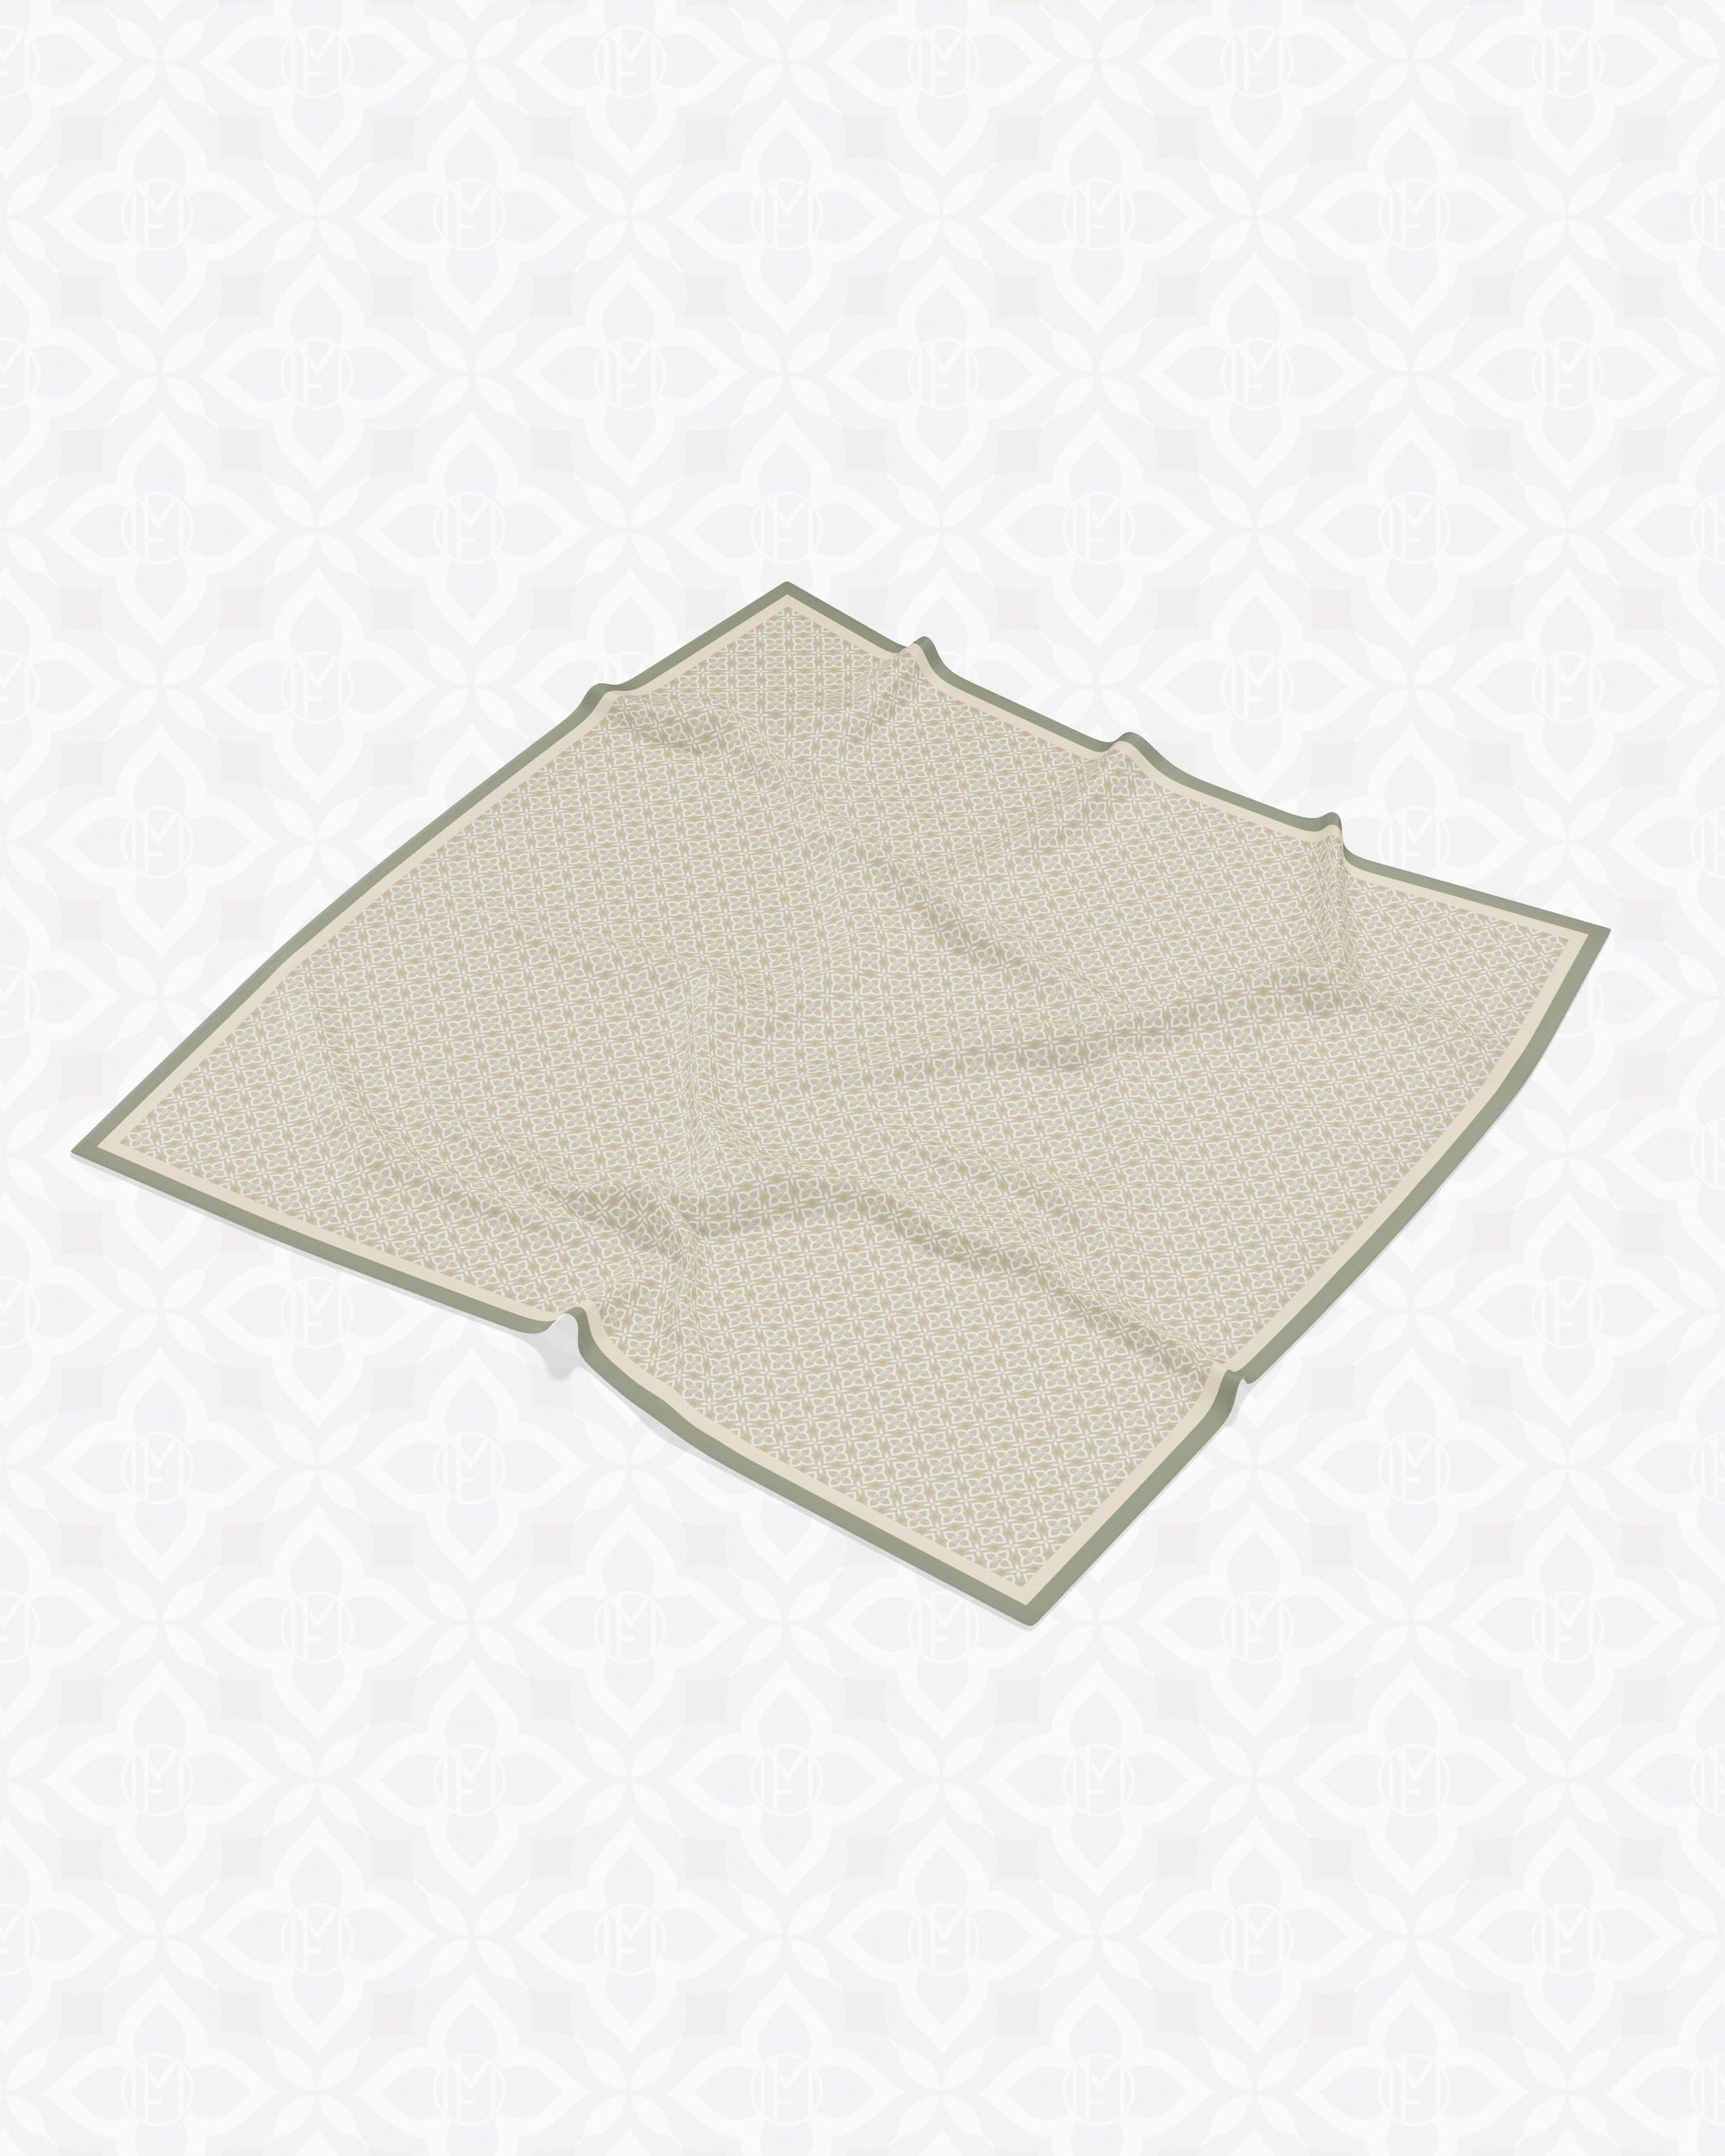 Clover Voile Square - Hay